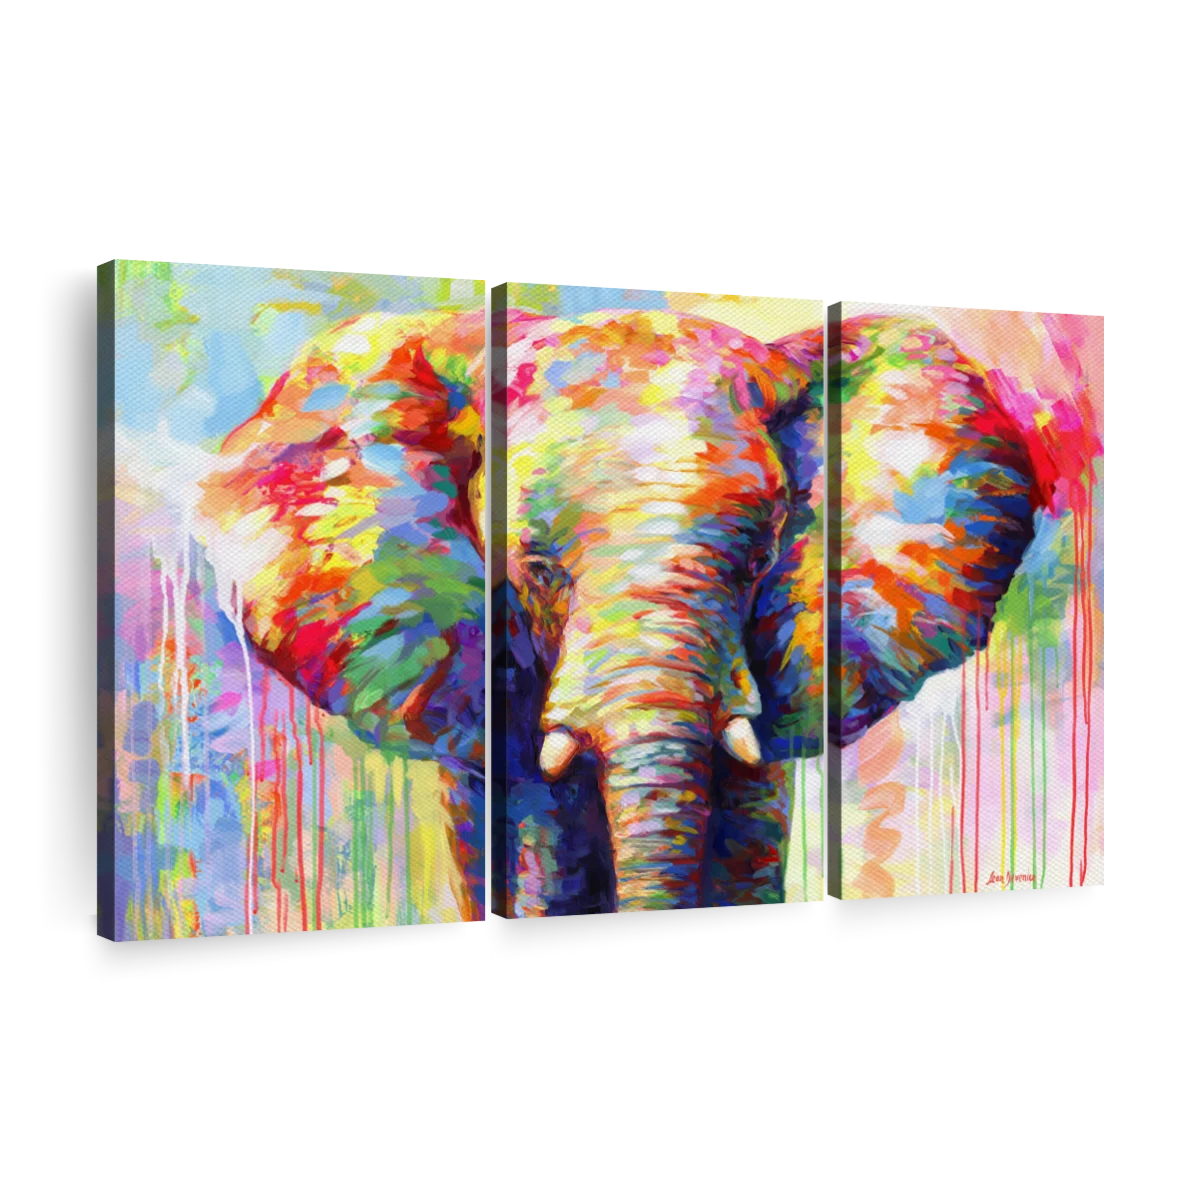 Flower Power Paint-by-Number Wall Mural – Elephants on the Wall